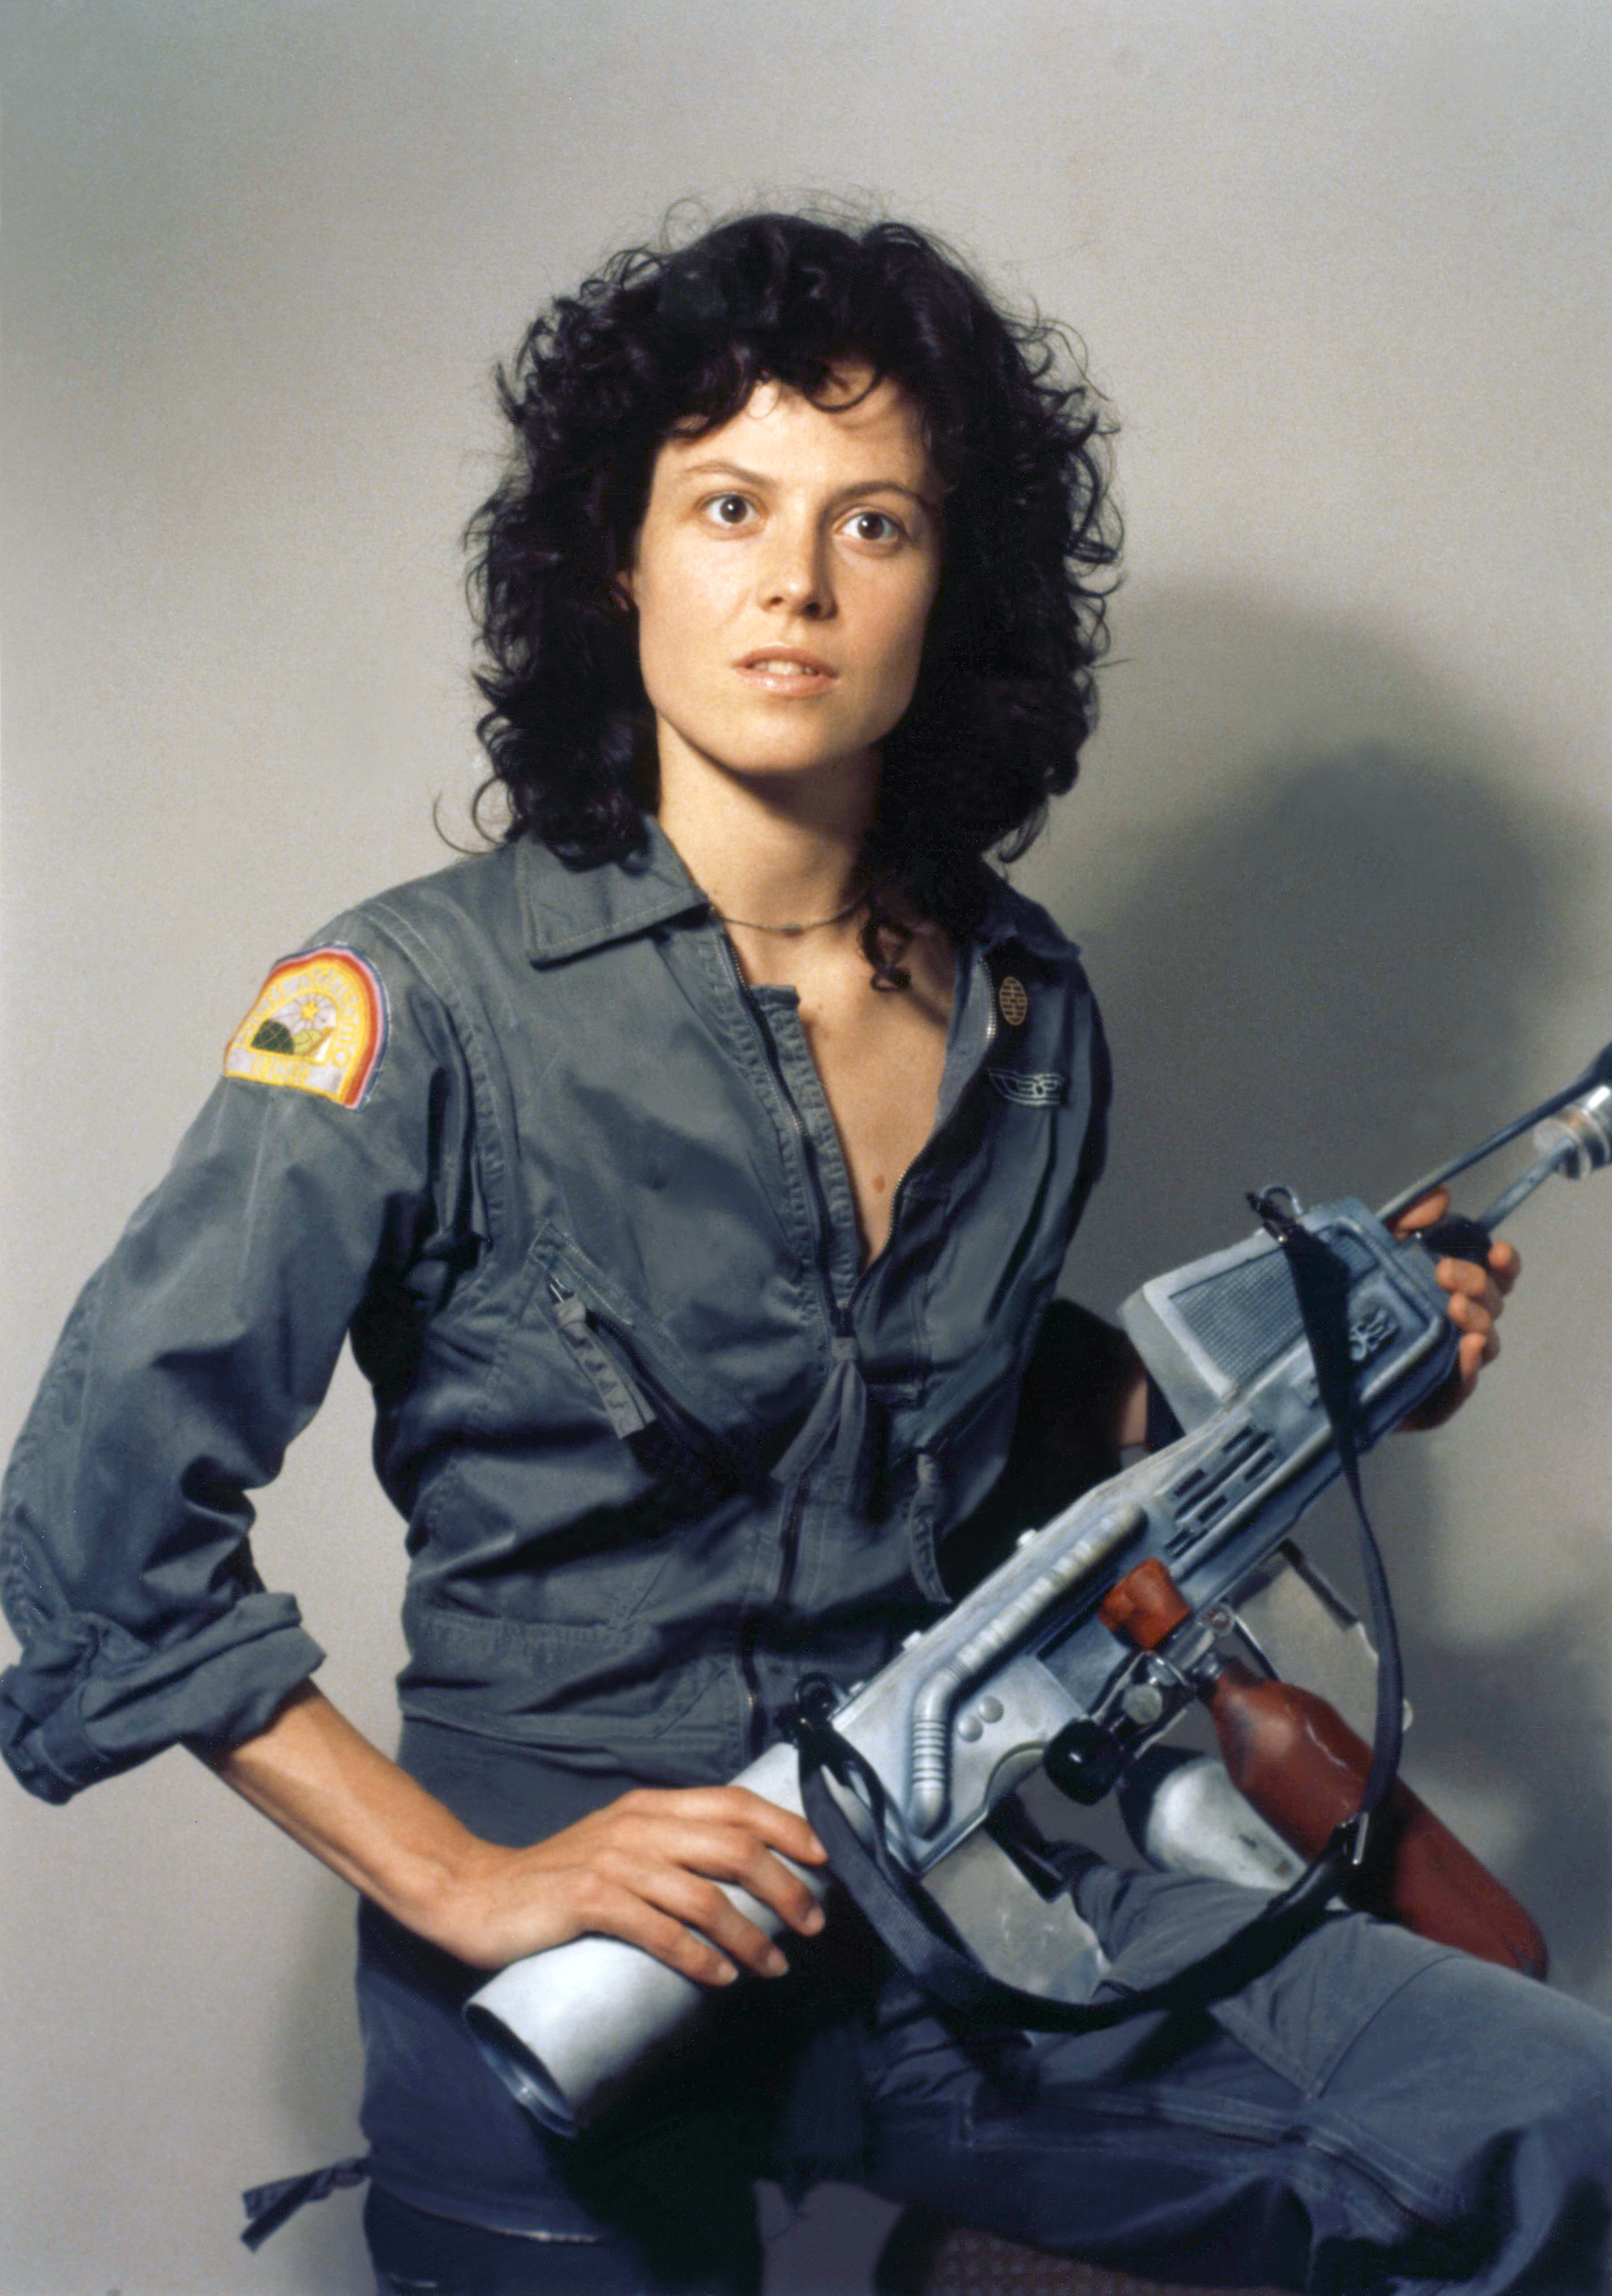 Sigourney Weaver on the set of "Alien," in 1979 | Source: Getty Images